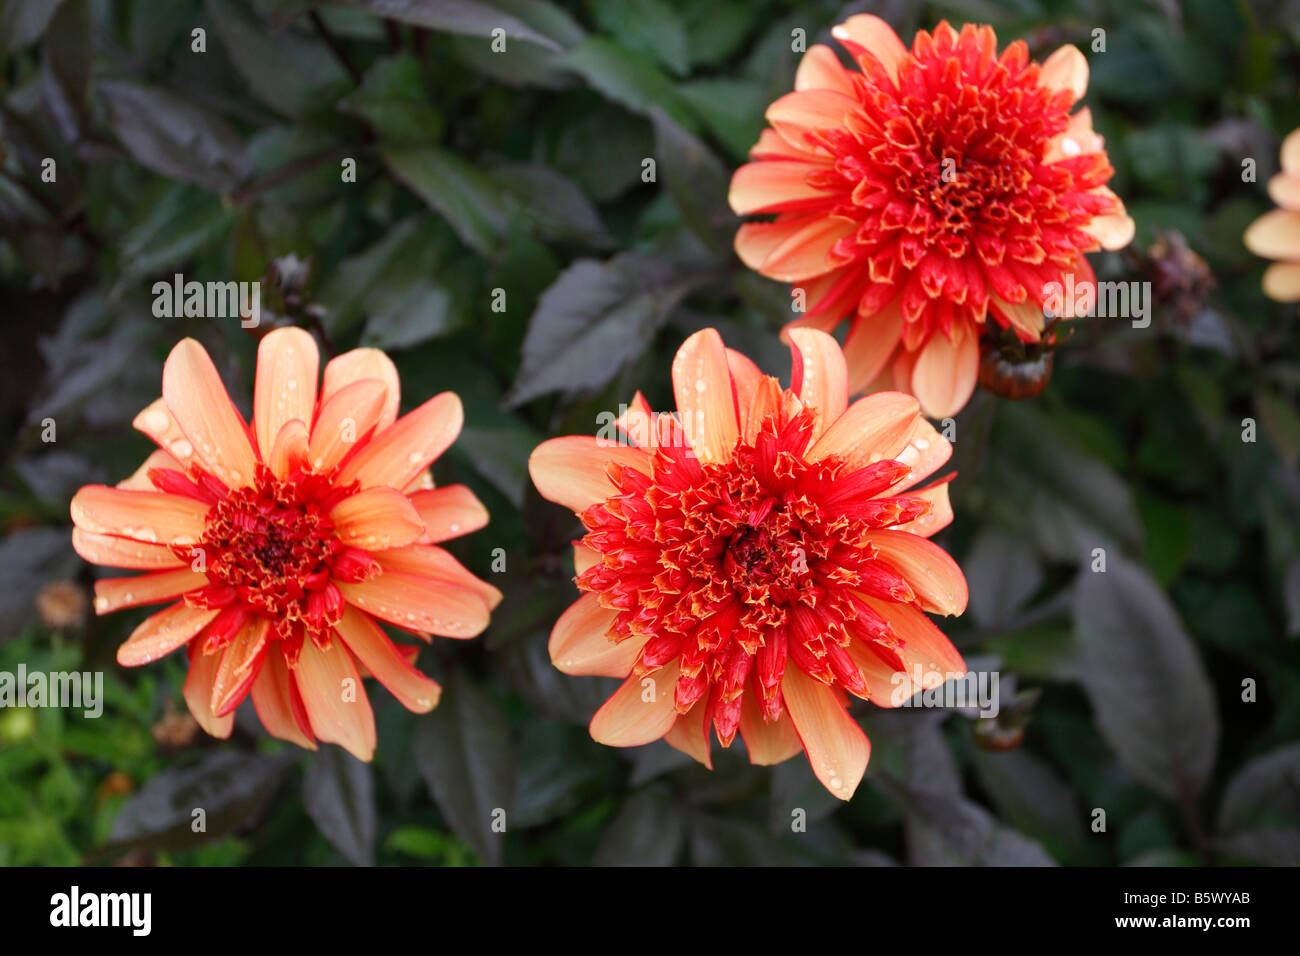 CHRYSANTHEMUM GEORGE GRIFFITHS CLOSE UP OF FLOWER Stock Photo